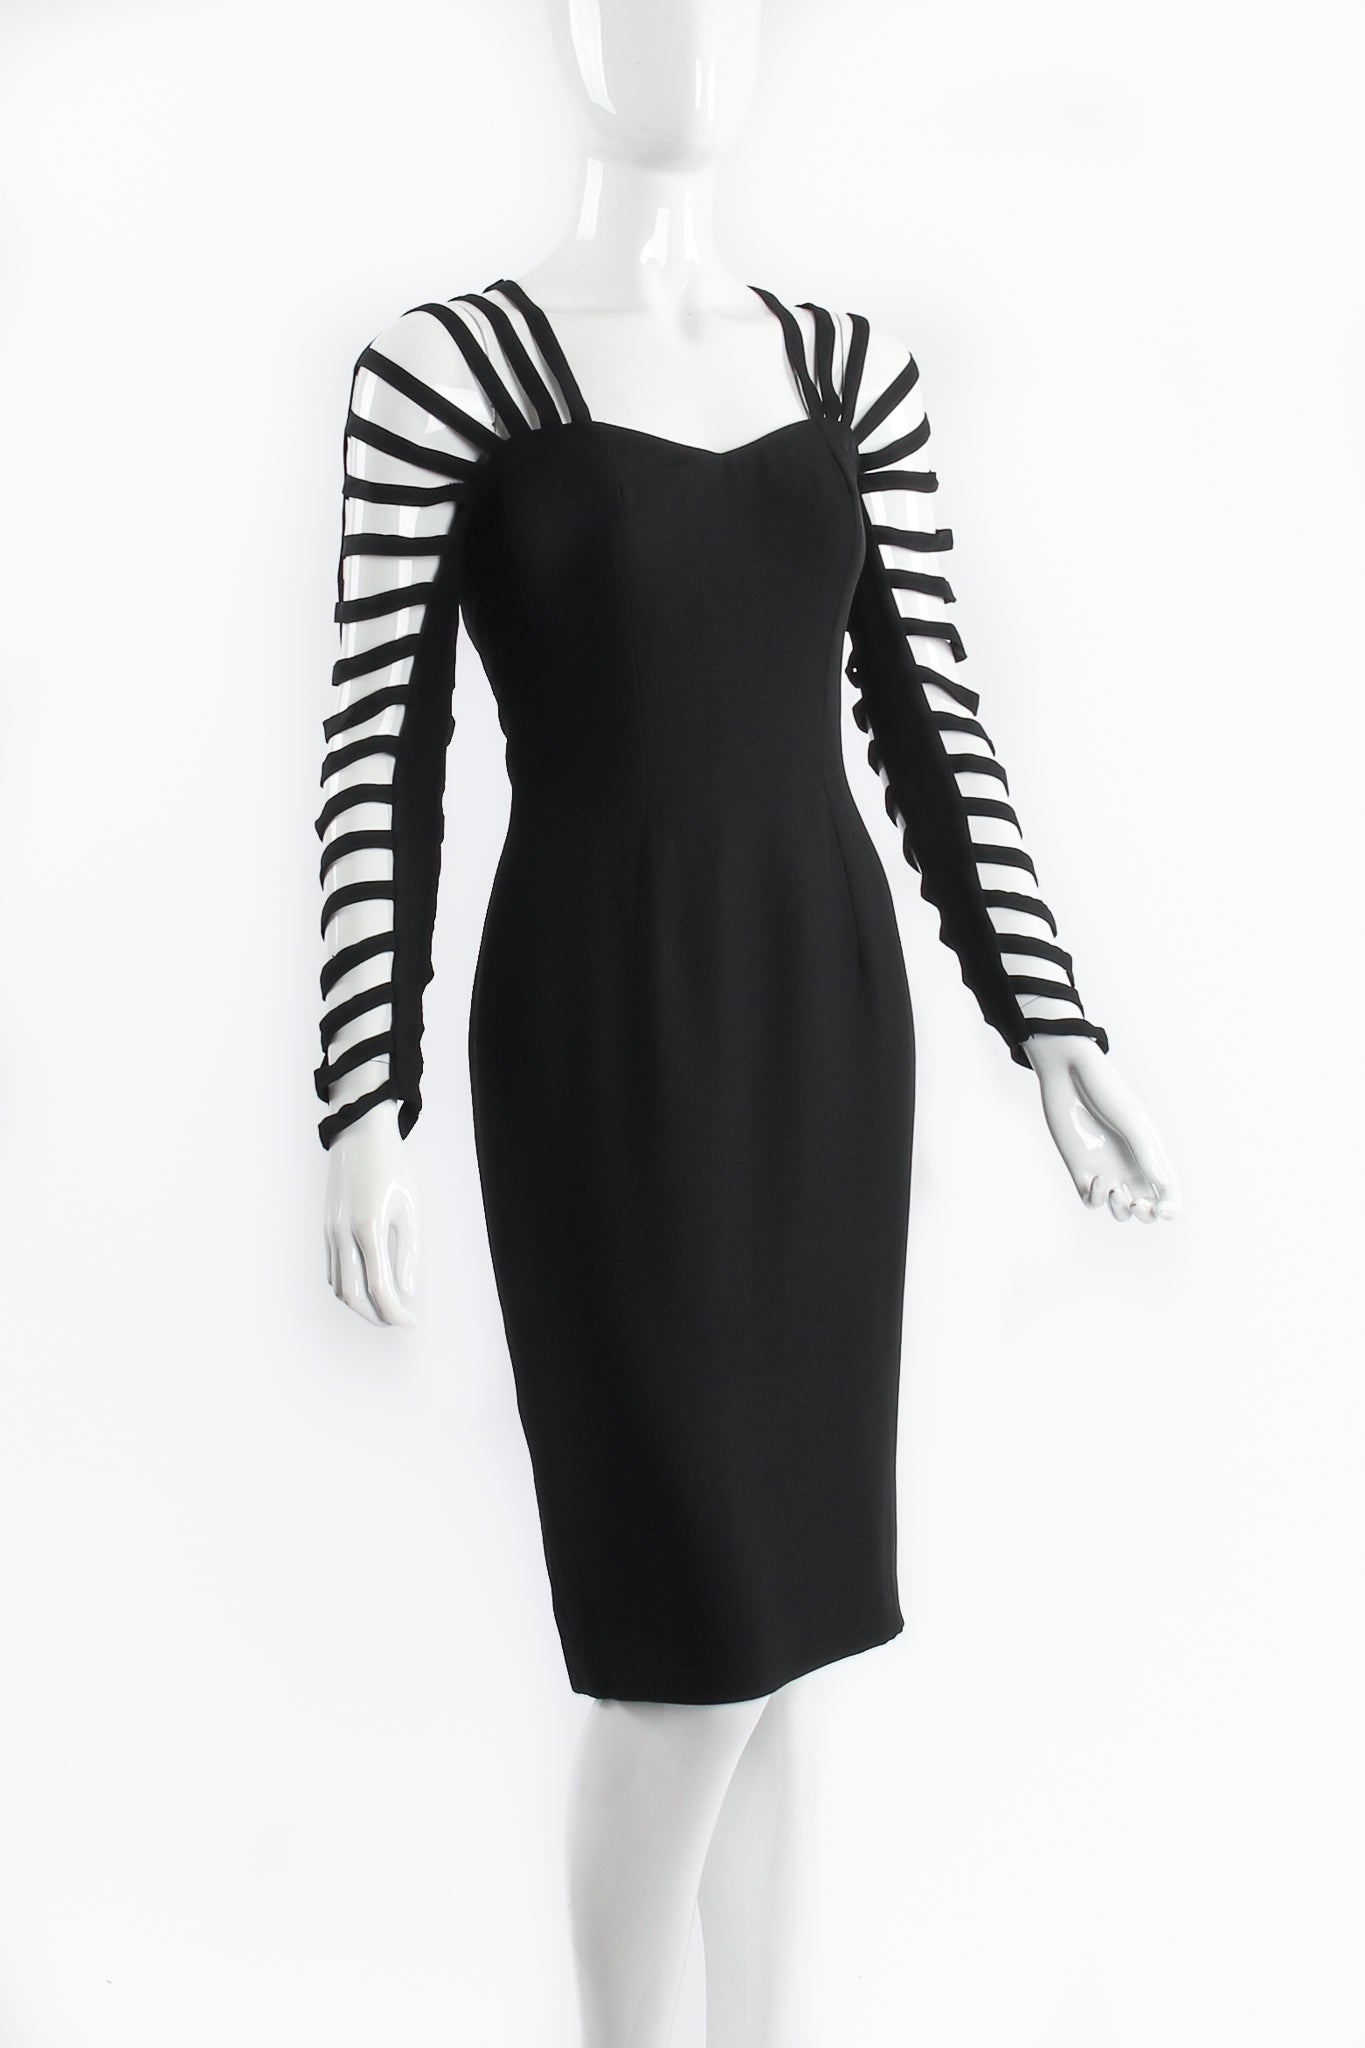 Vintage Sophie Sitbon Strappy Cage Cocktail Sheath Dress on Mannequin crop at Recess Los Angeles